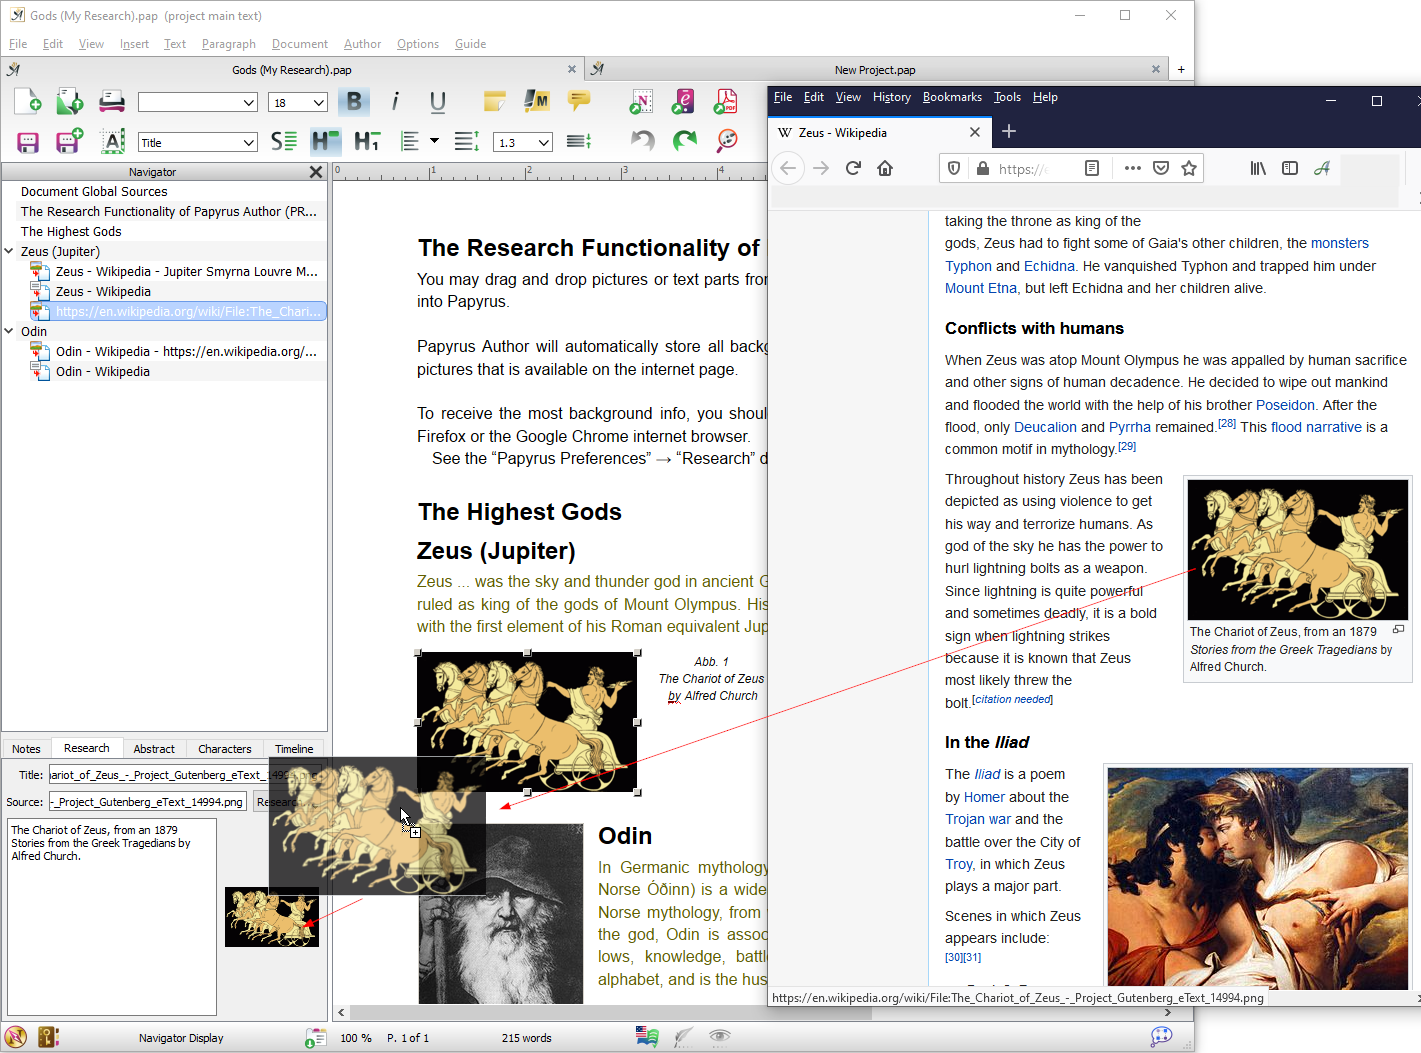 Updating an image in the Research tab of the Navigator